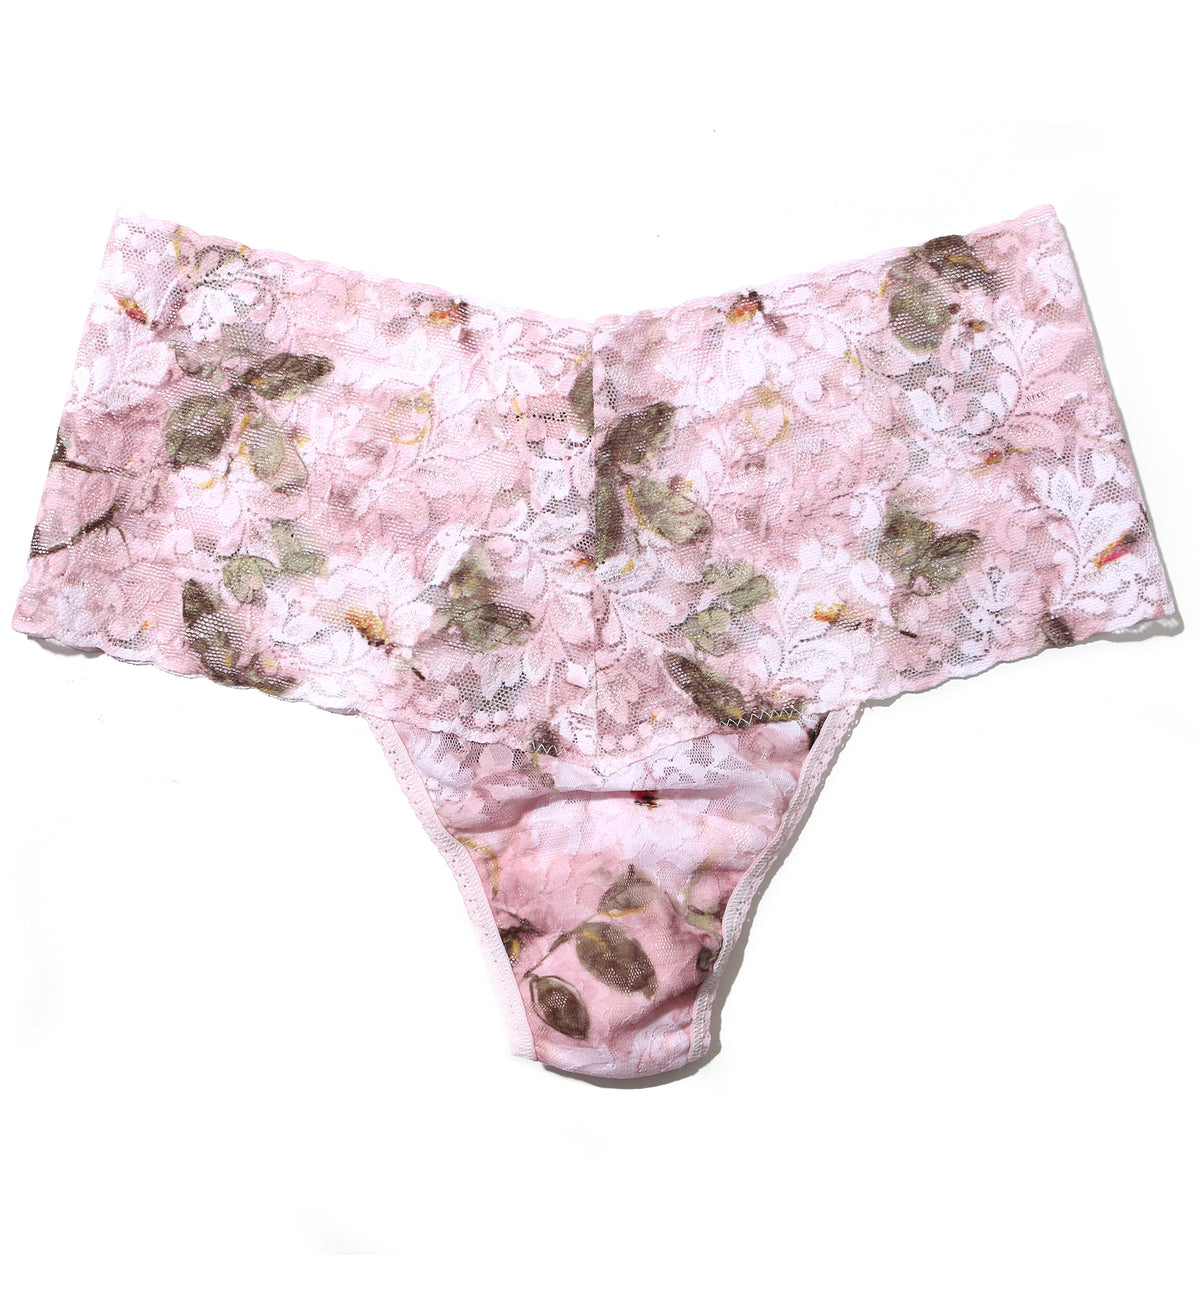 Hanky Panky Printed Retro Lace Thong (PR9K1926),Antique Lily - Antique Lily,One Size